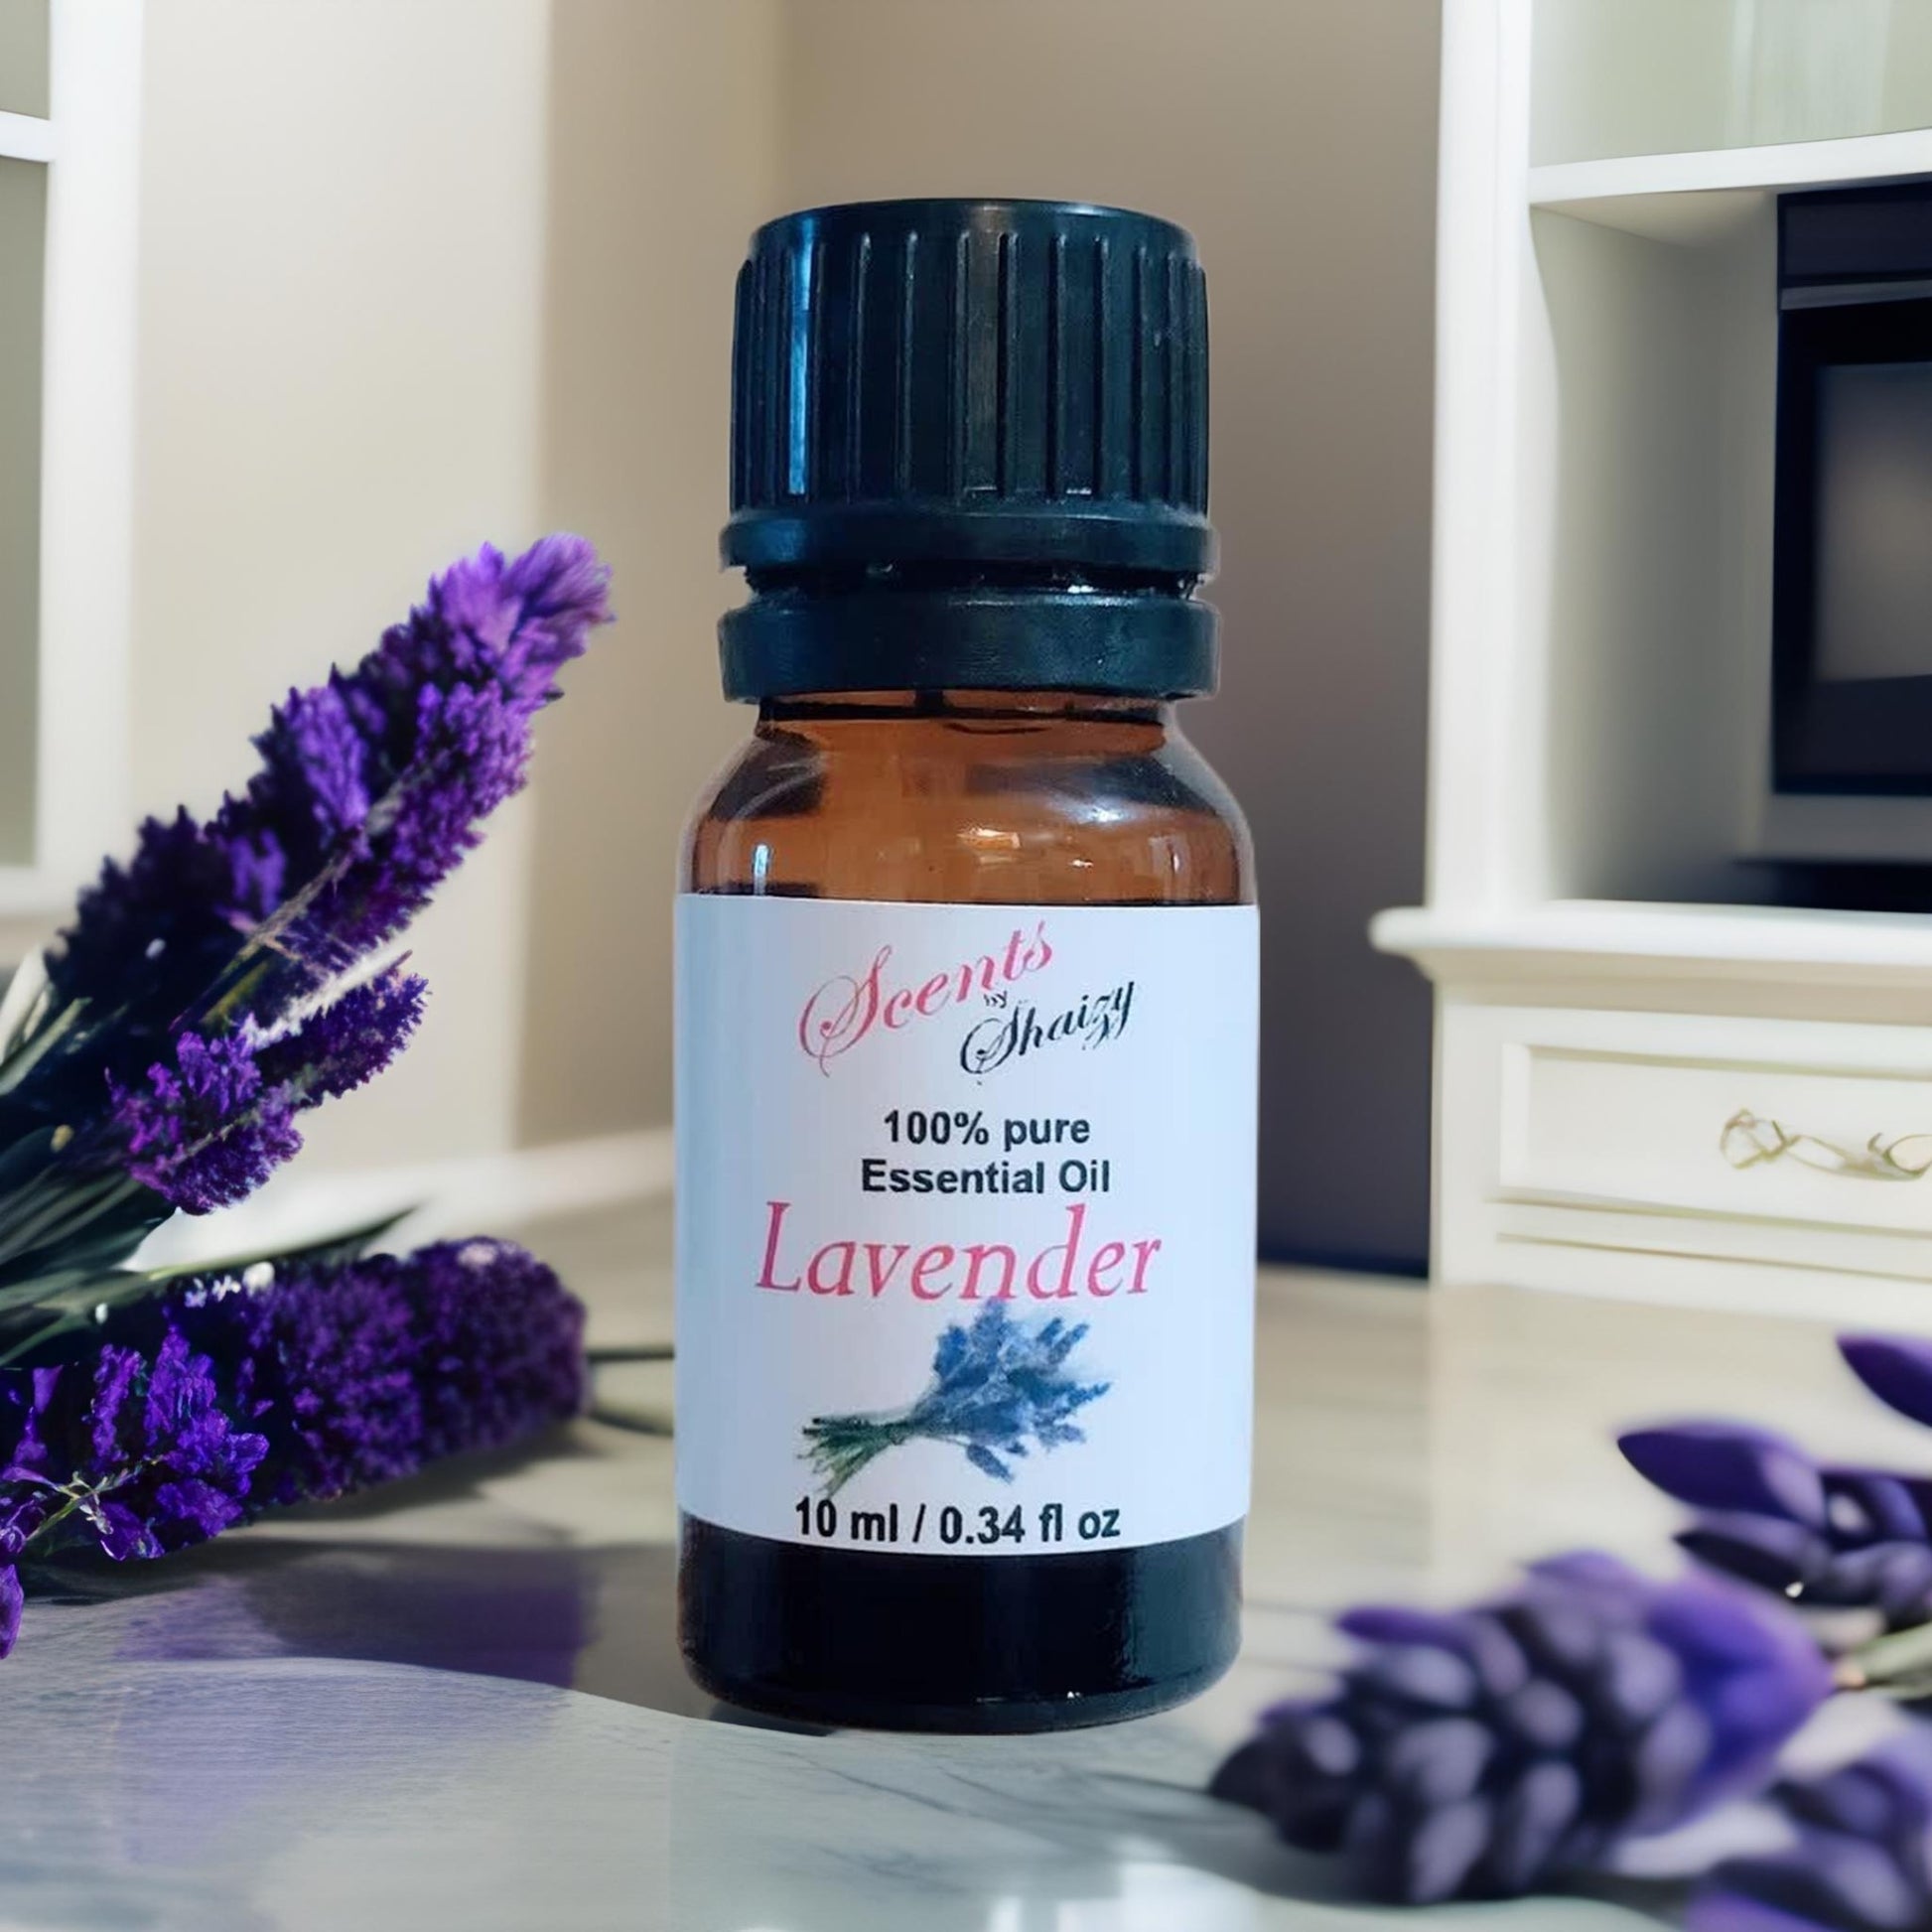 Lavender Essential Oil surrounded by flowers